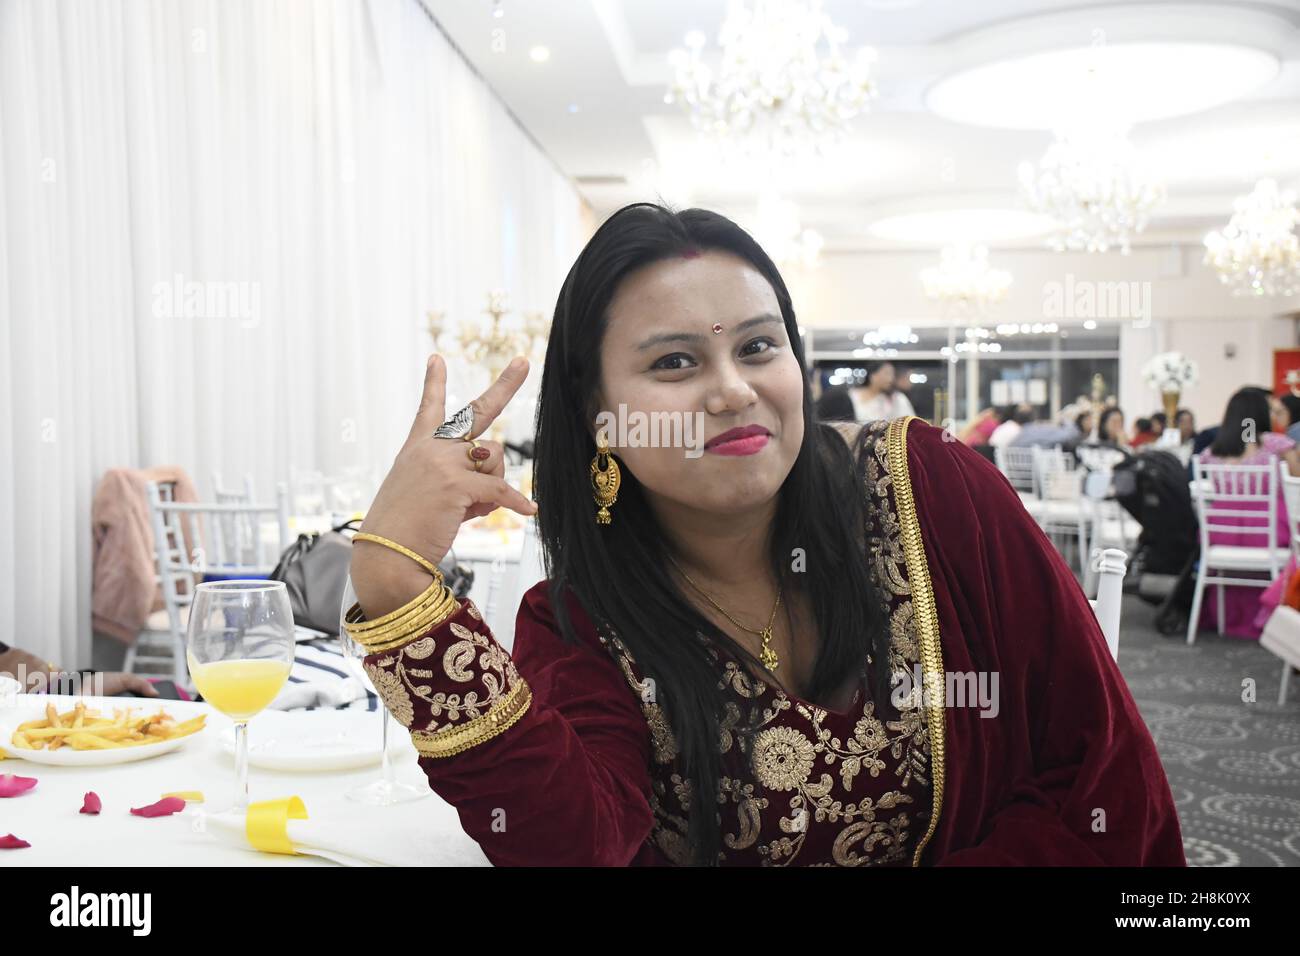 Portrait of a beautiful woman in a traditional costume at an event Stock Photo